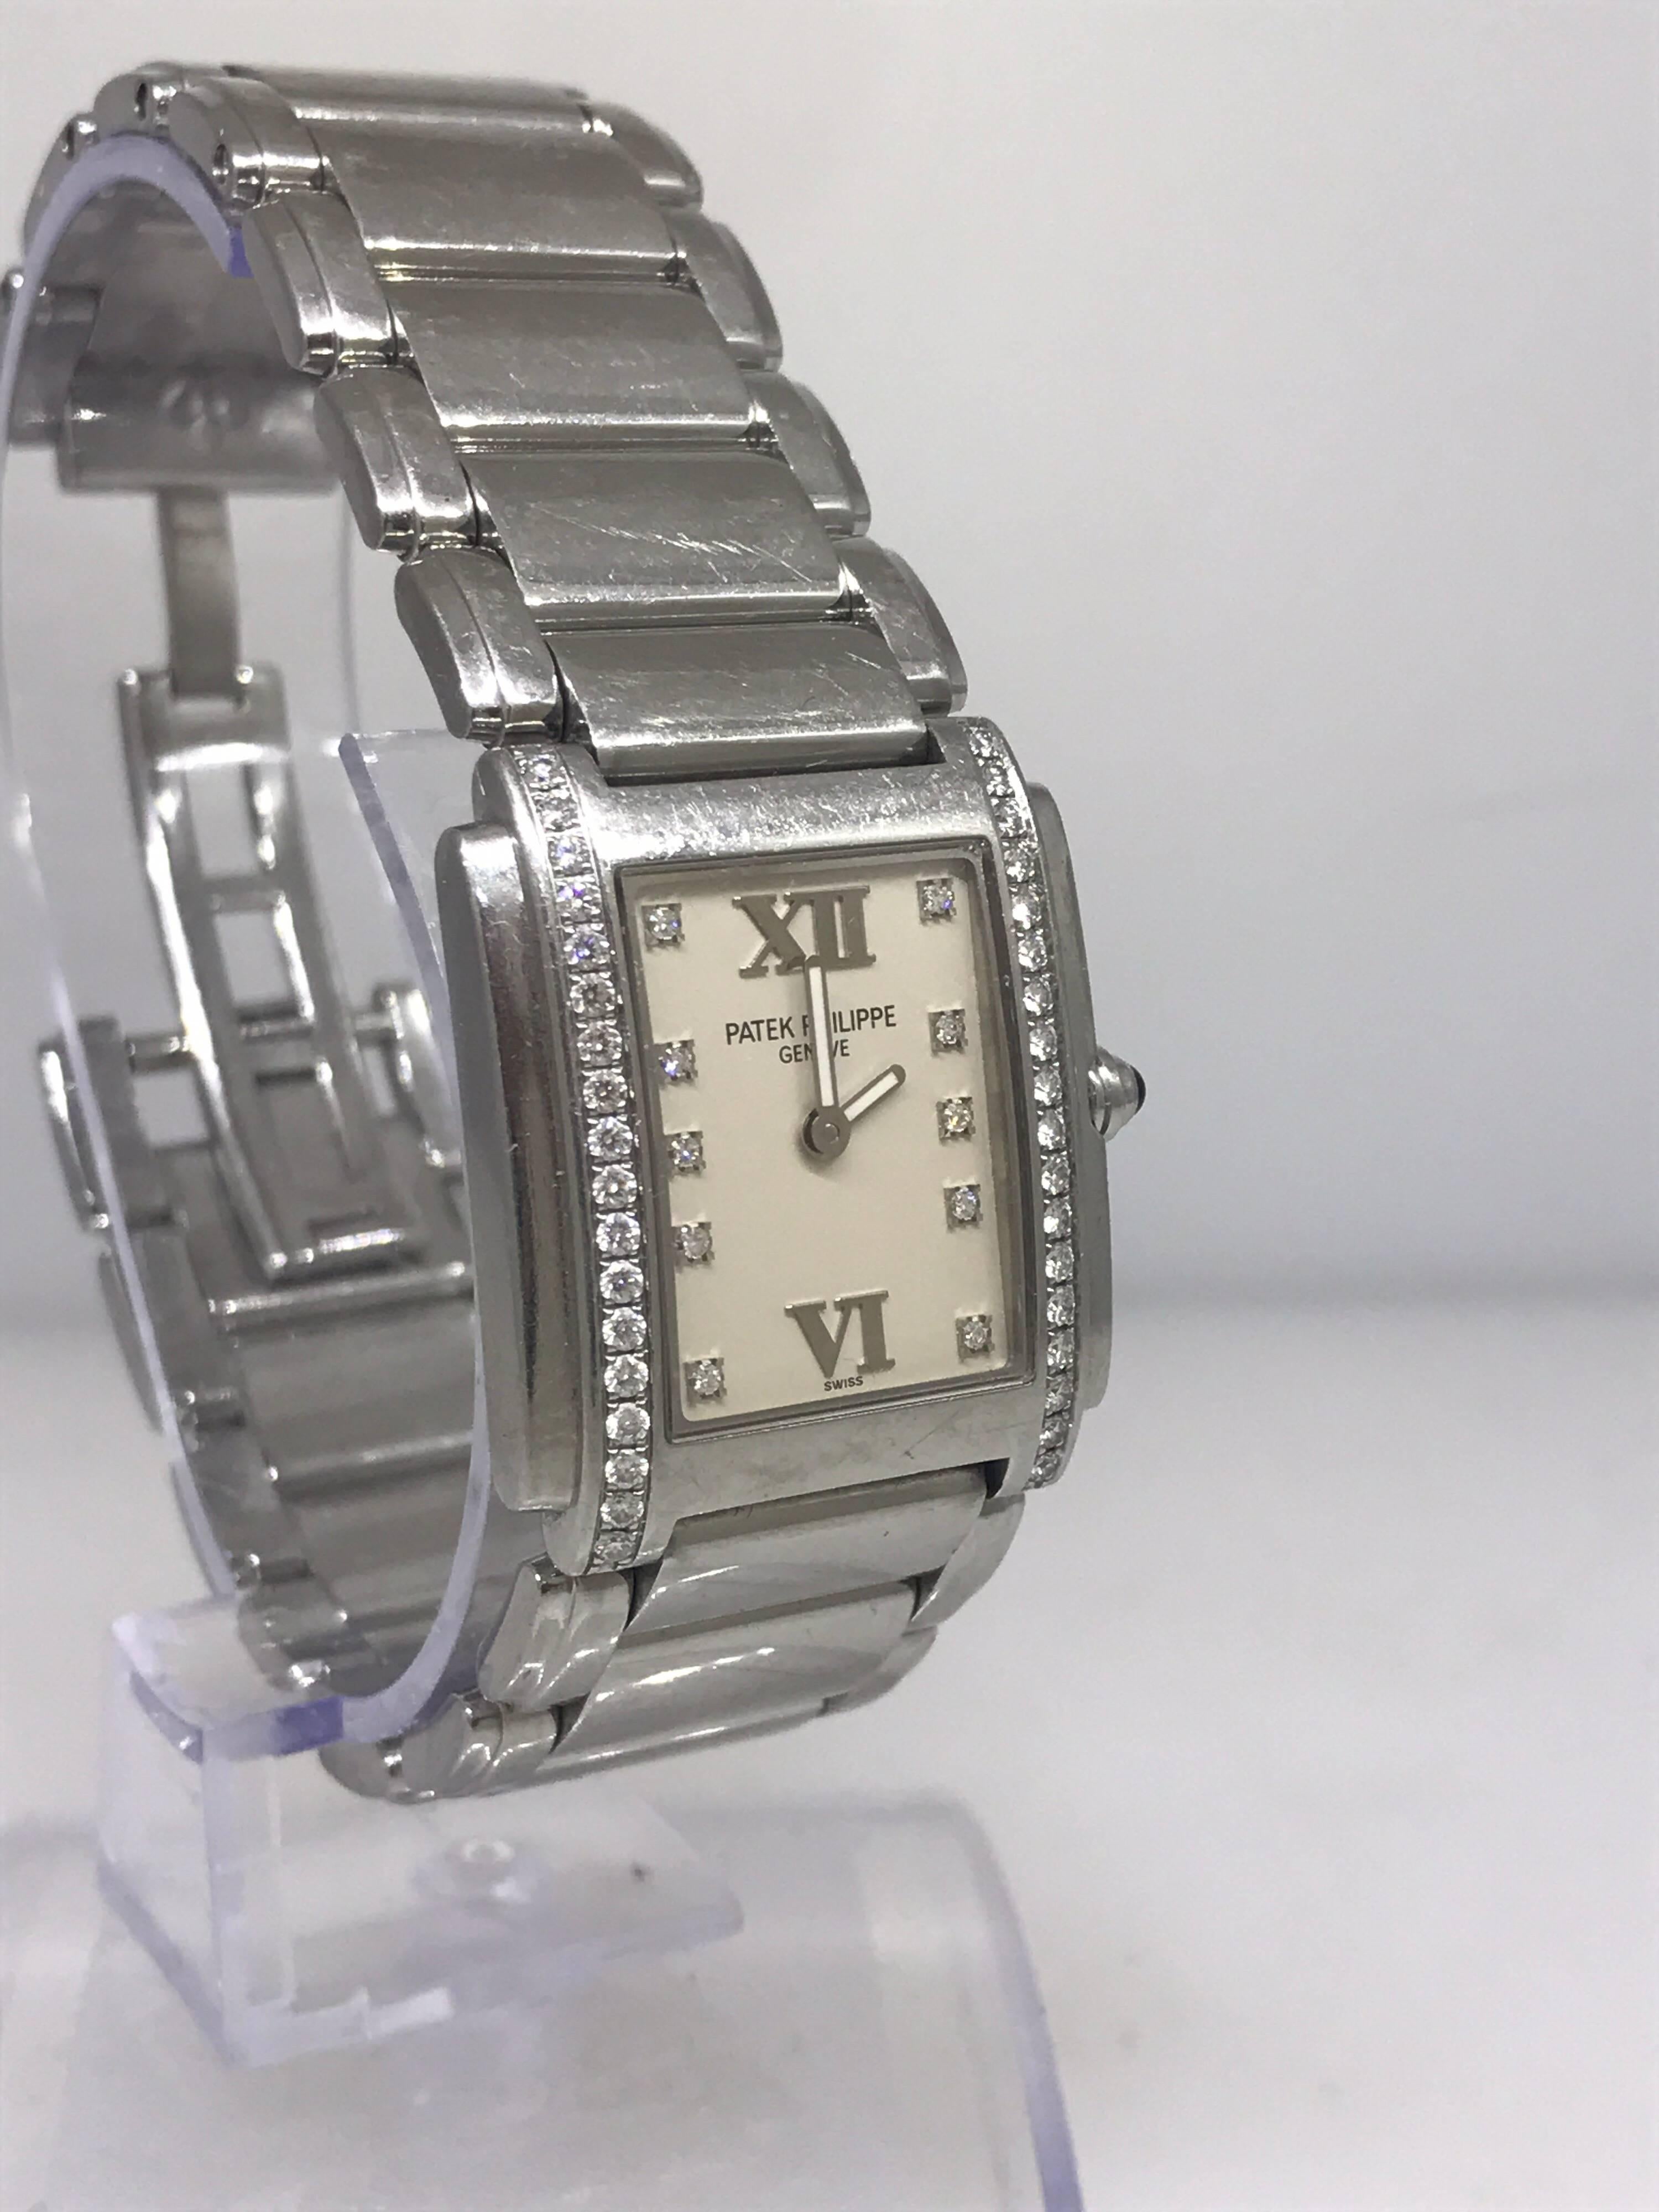 Patek Phillipe Twenty 4 Lady's Watch

Model Number: 4910/10A-011

100% Authentic

Pre-ownded - very good condition

Watch comes with original Patek Phillipe traveling box (as seen in photos)

Stainless Steel Case & Bracelet

Diamonds on either side